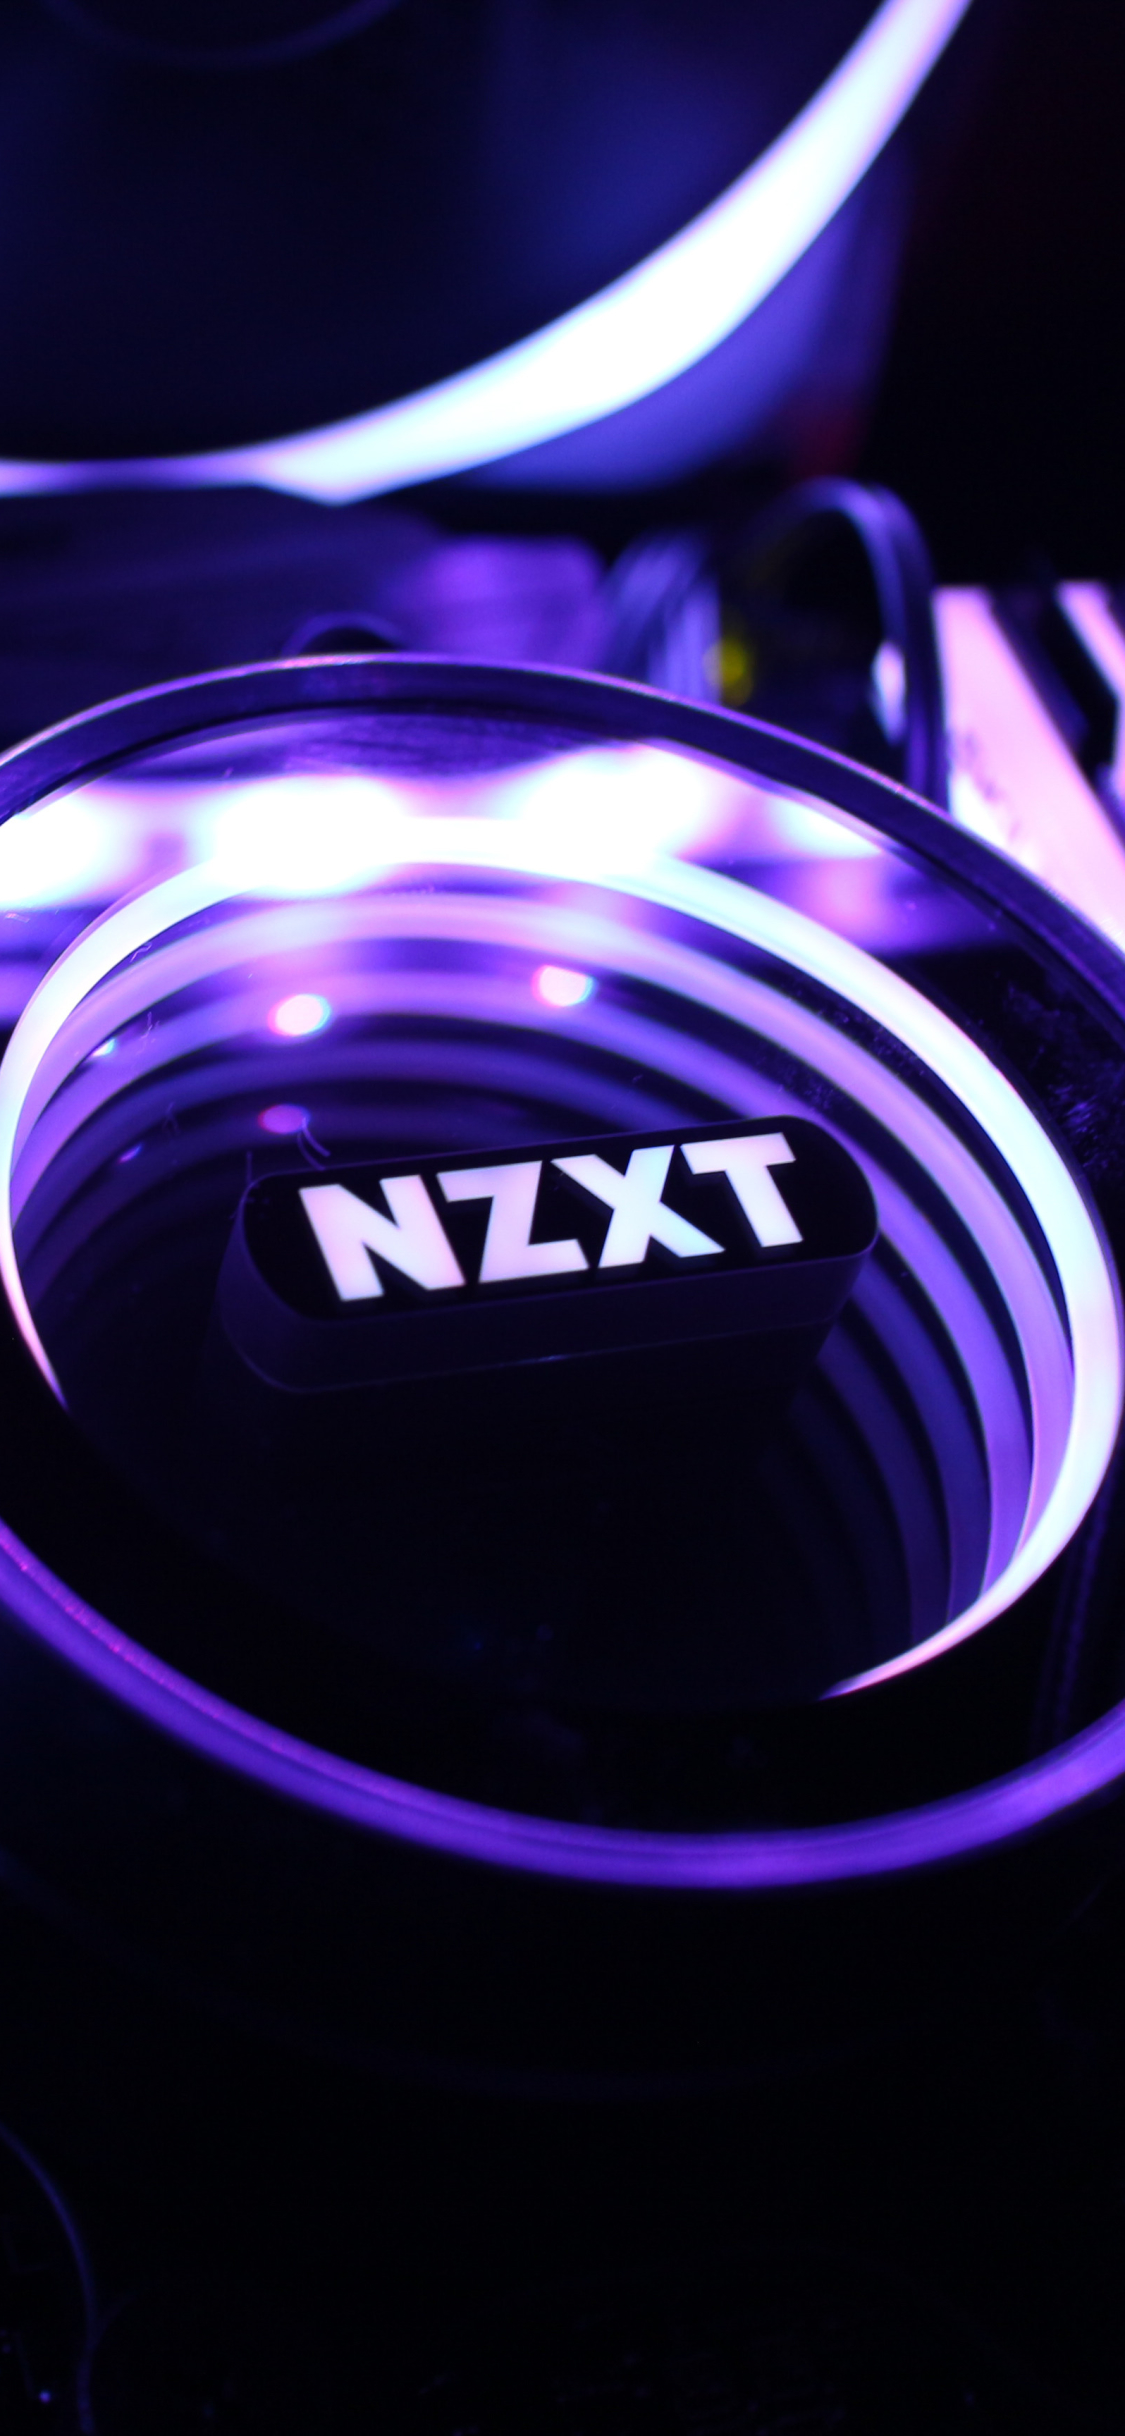 NZXT  This week on the podcast the crew are joined by NZXTs Marketing  Manager for DACH Kat Kat and the crew discuss driving on the wrong side  of the road superior